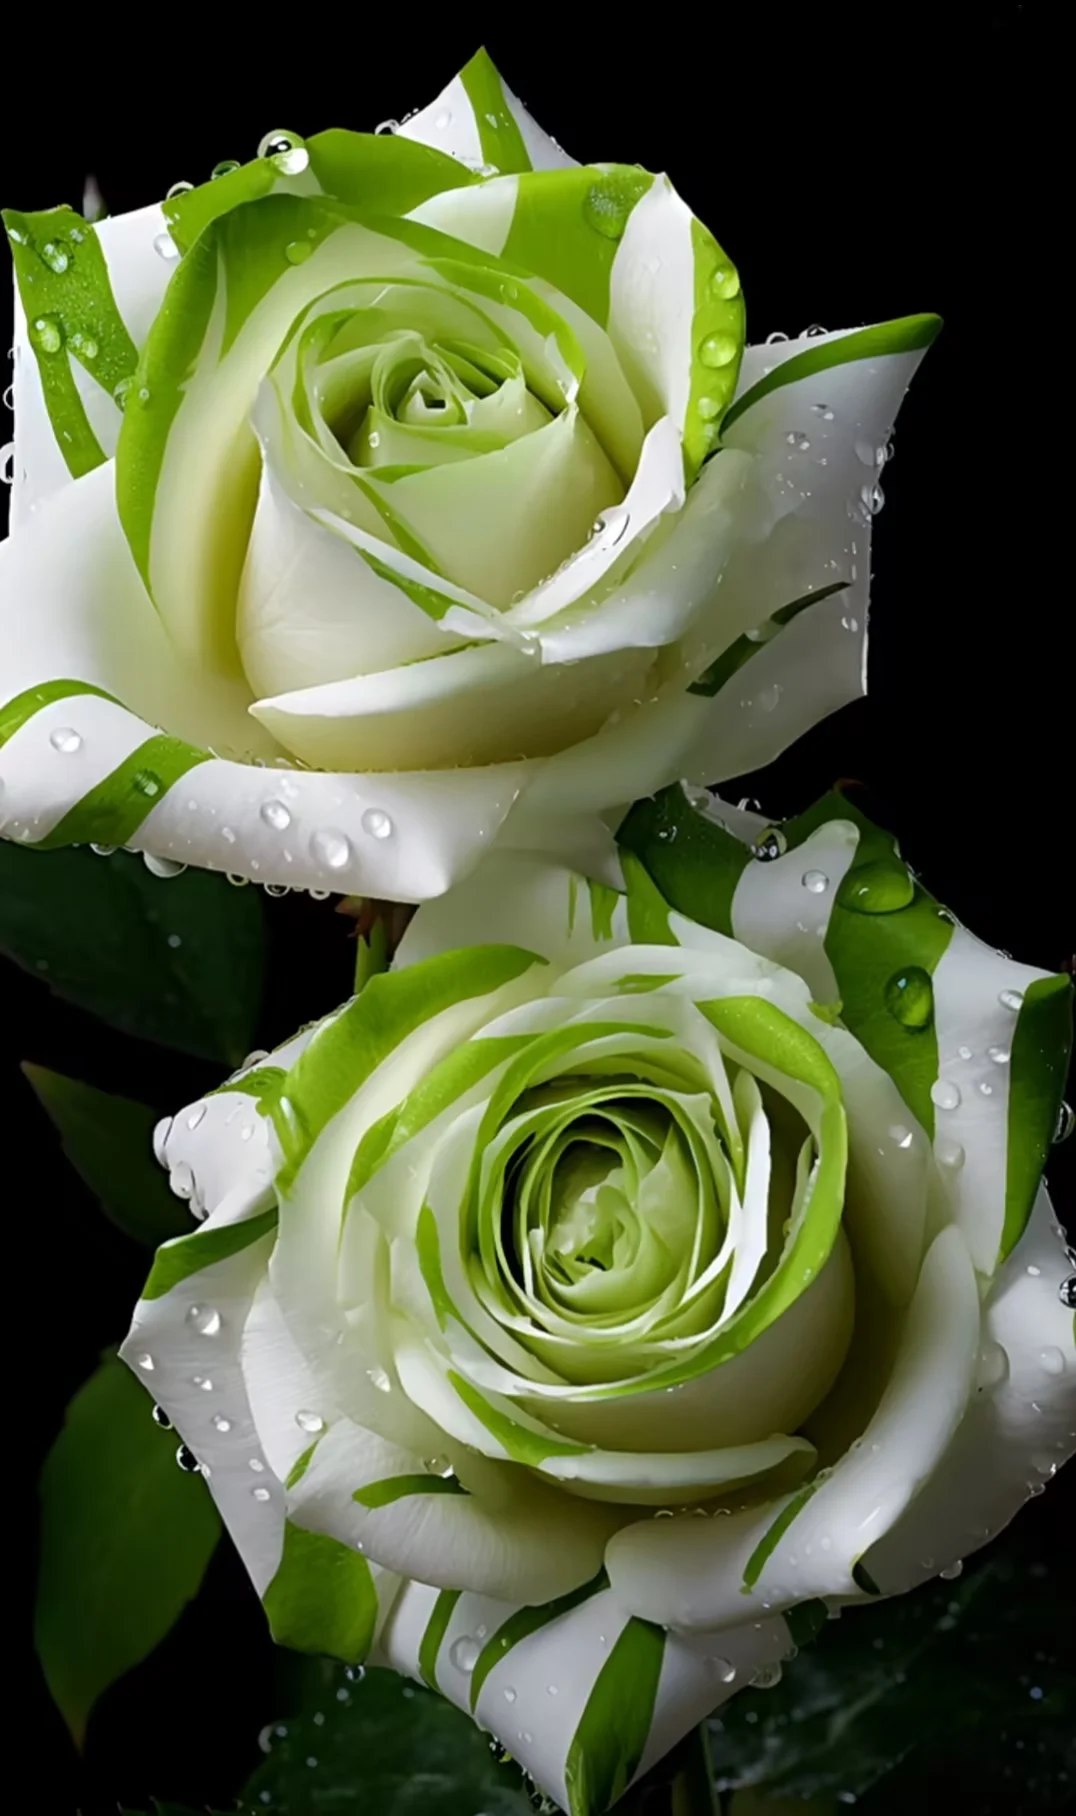 🤍Rare White and Green Twin Roses💚